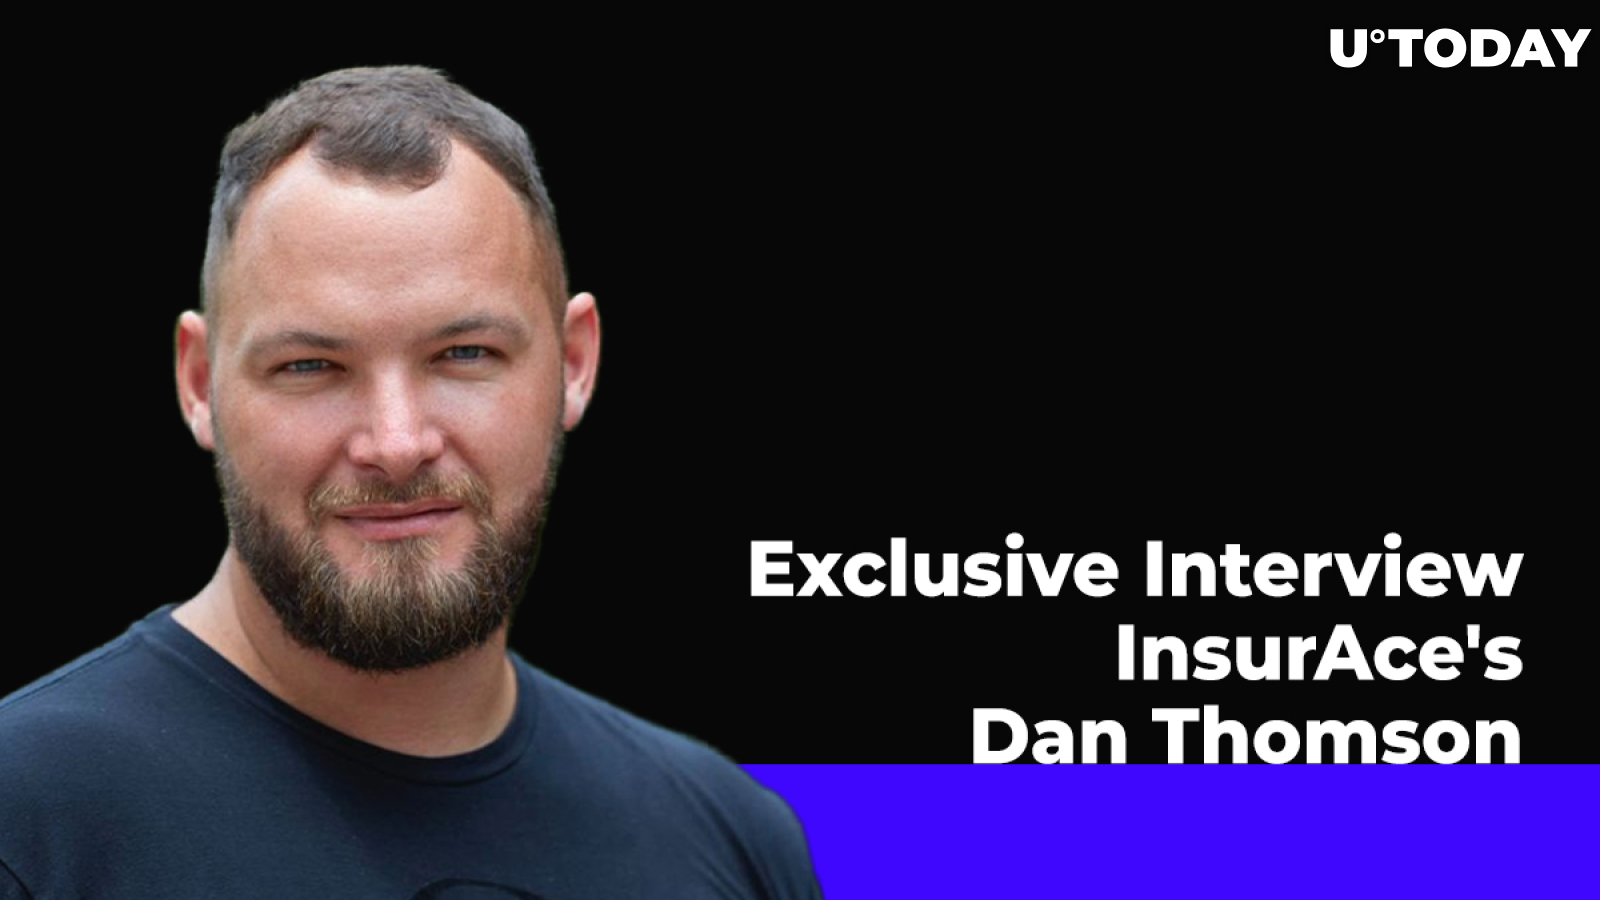 DeFi Insurance: How It Works and What It Offers in Exclusive Interview with InsurAce’s Dan Thomson